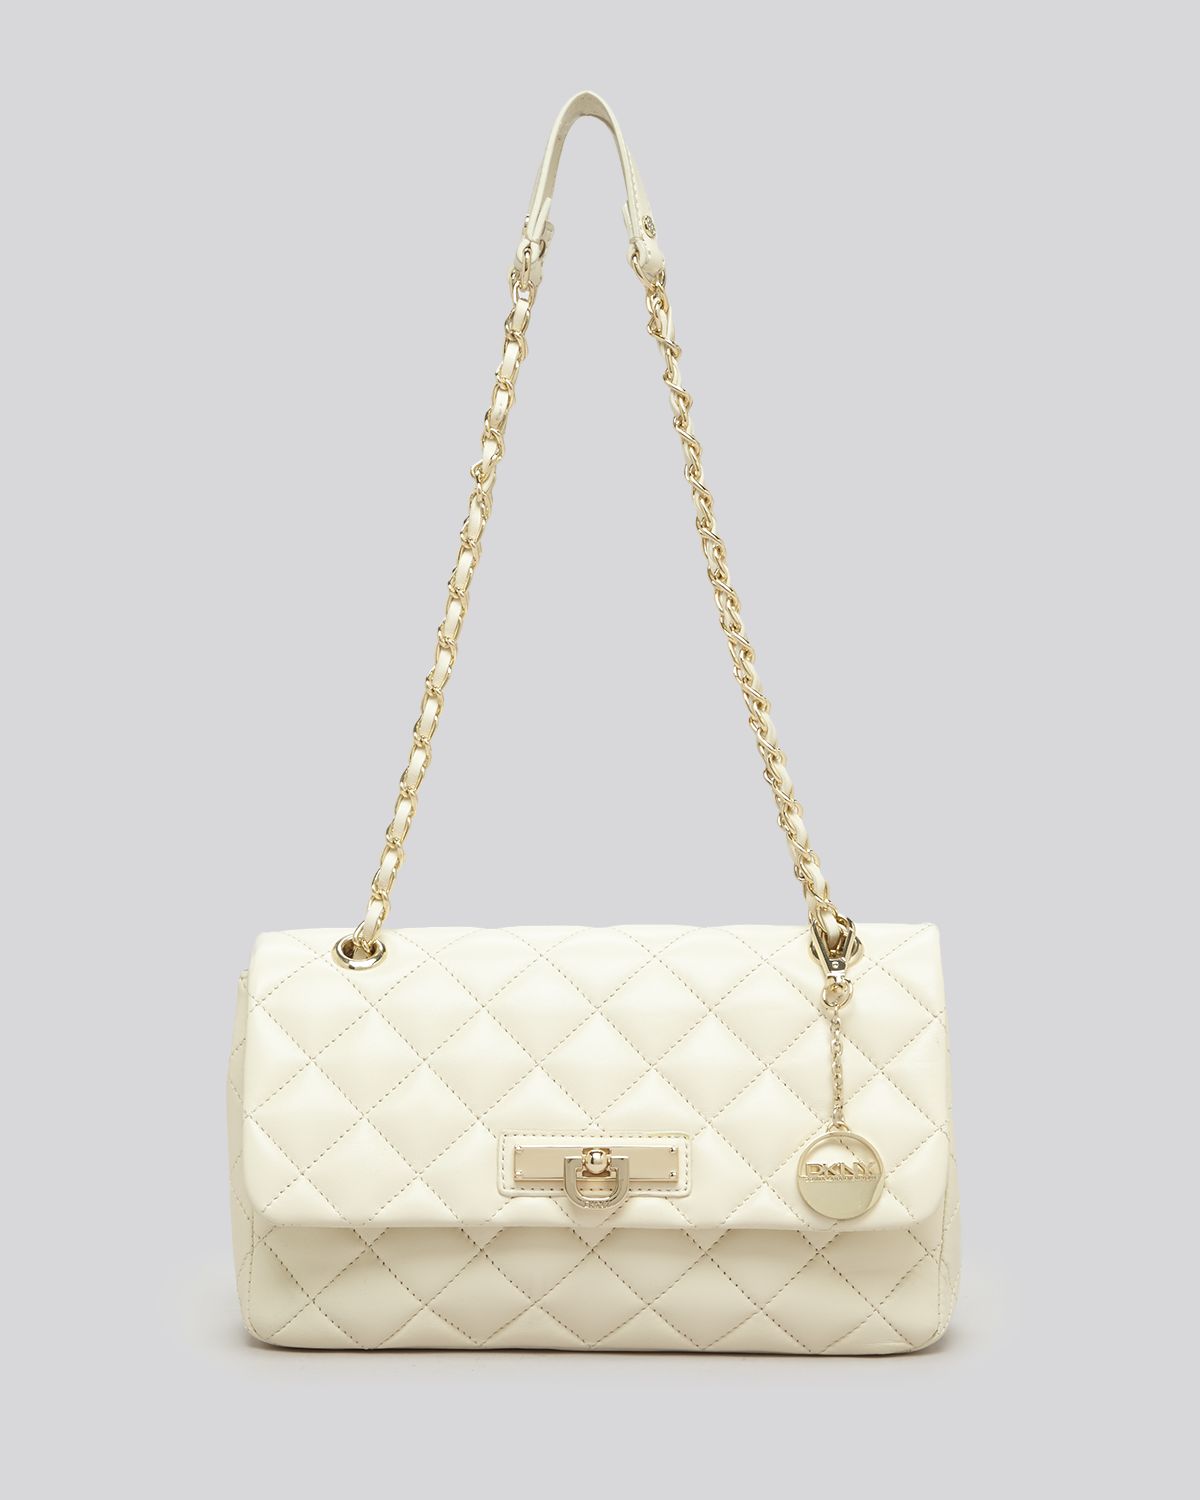 DKNY Shoulder Bag Gansevoort Quilted Nappa in Ivory (White) - Lyst